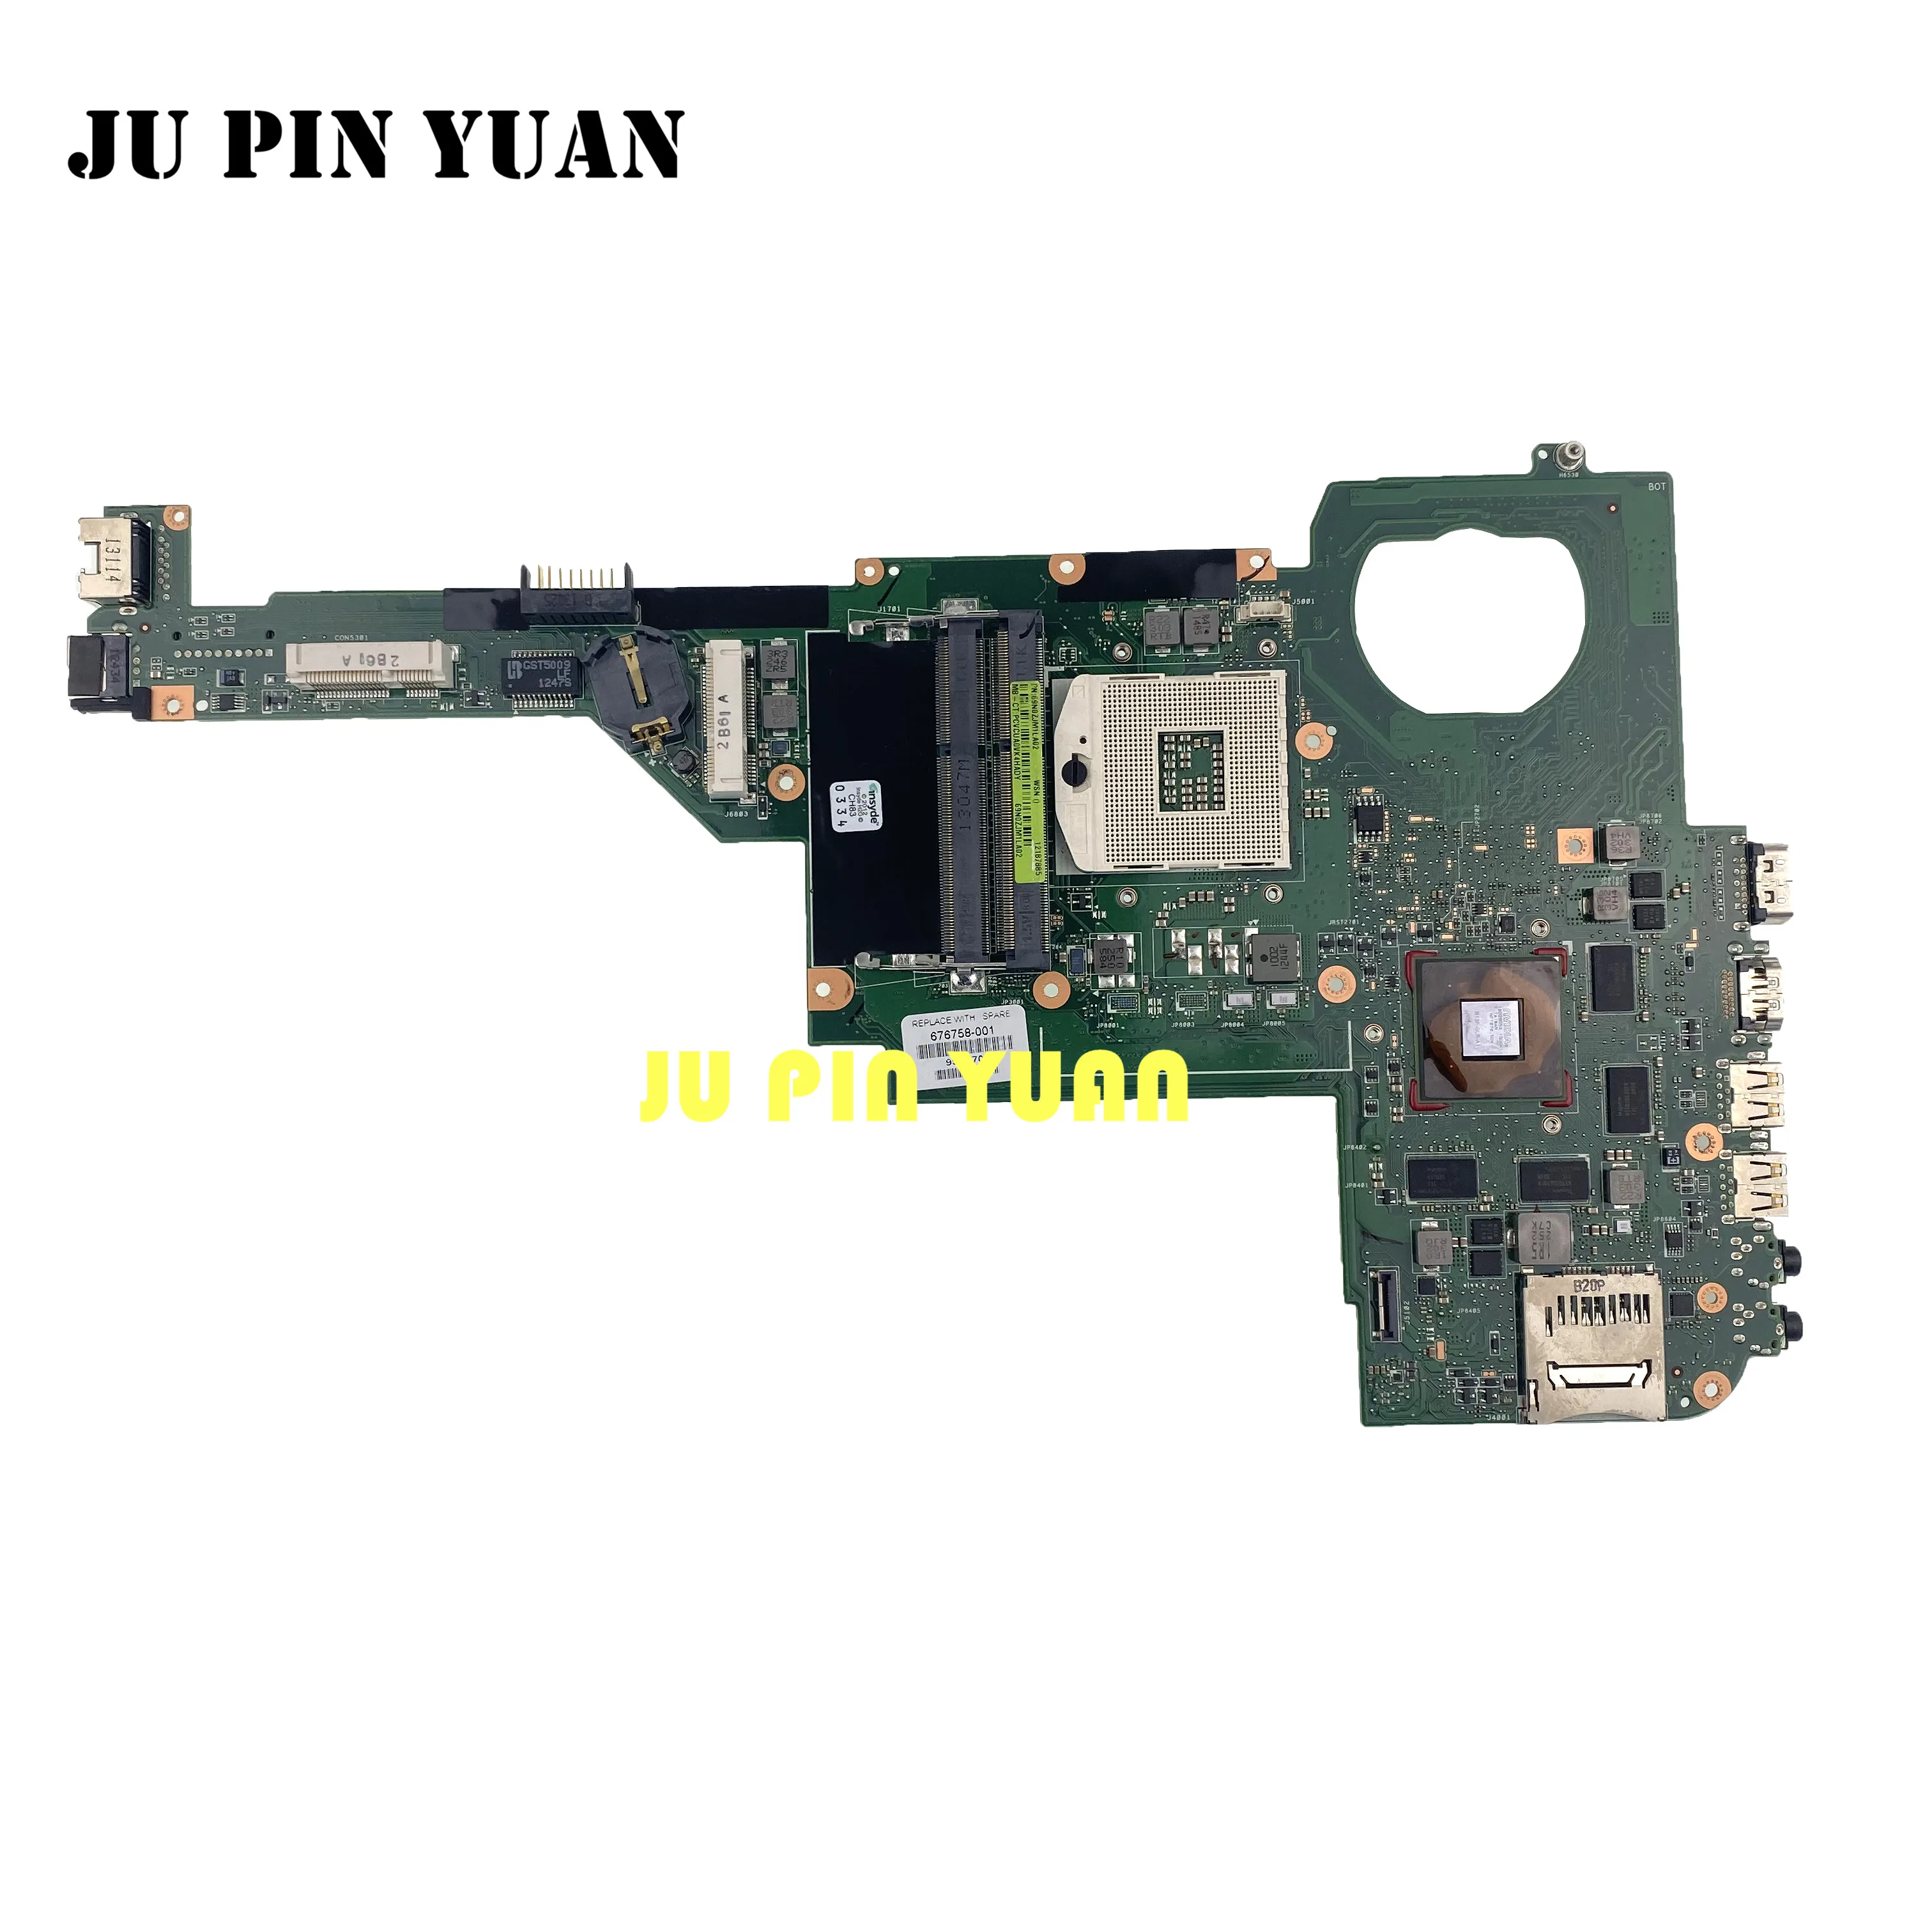 

676758-501 676758-001 Mainboard For HP ENVY DV4 DV4-5000 DV4T-5200 Laptop Motherboard HM76 GT630 All Functions Fully Tested